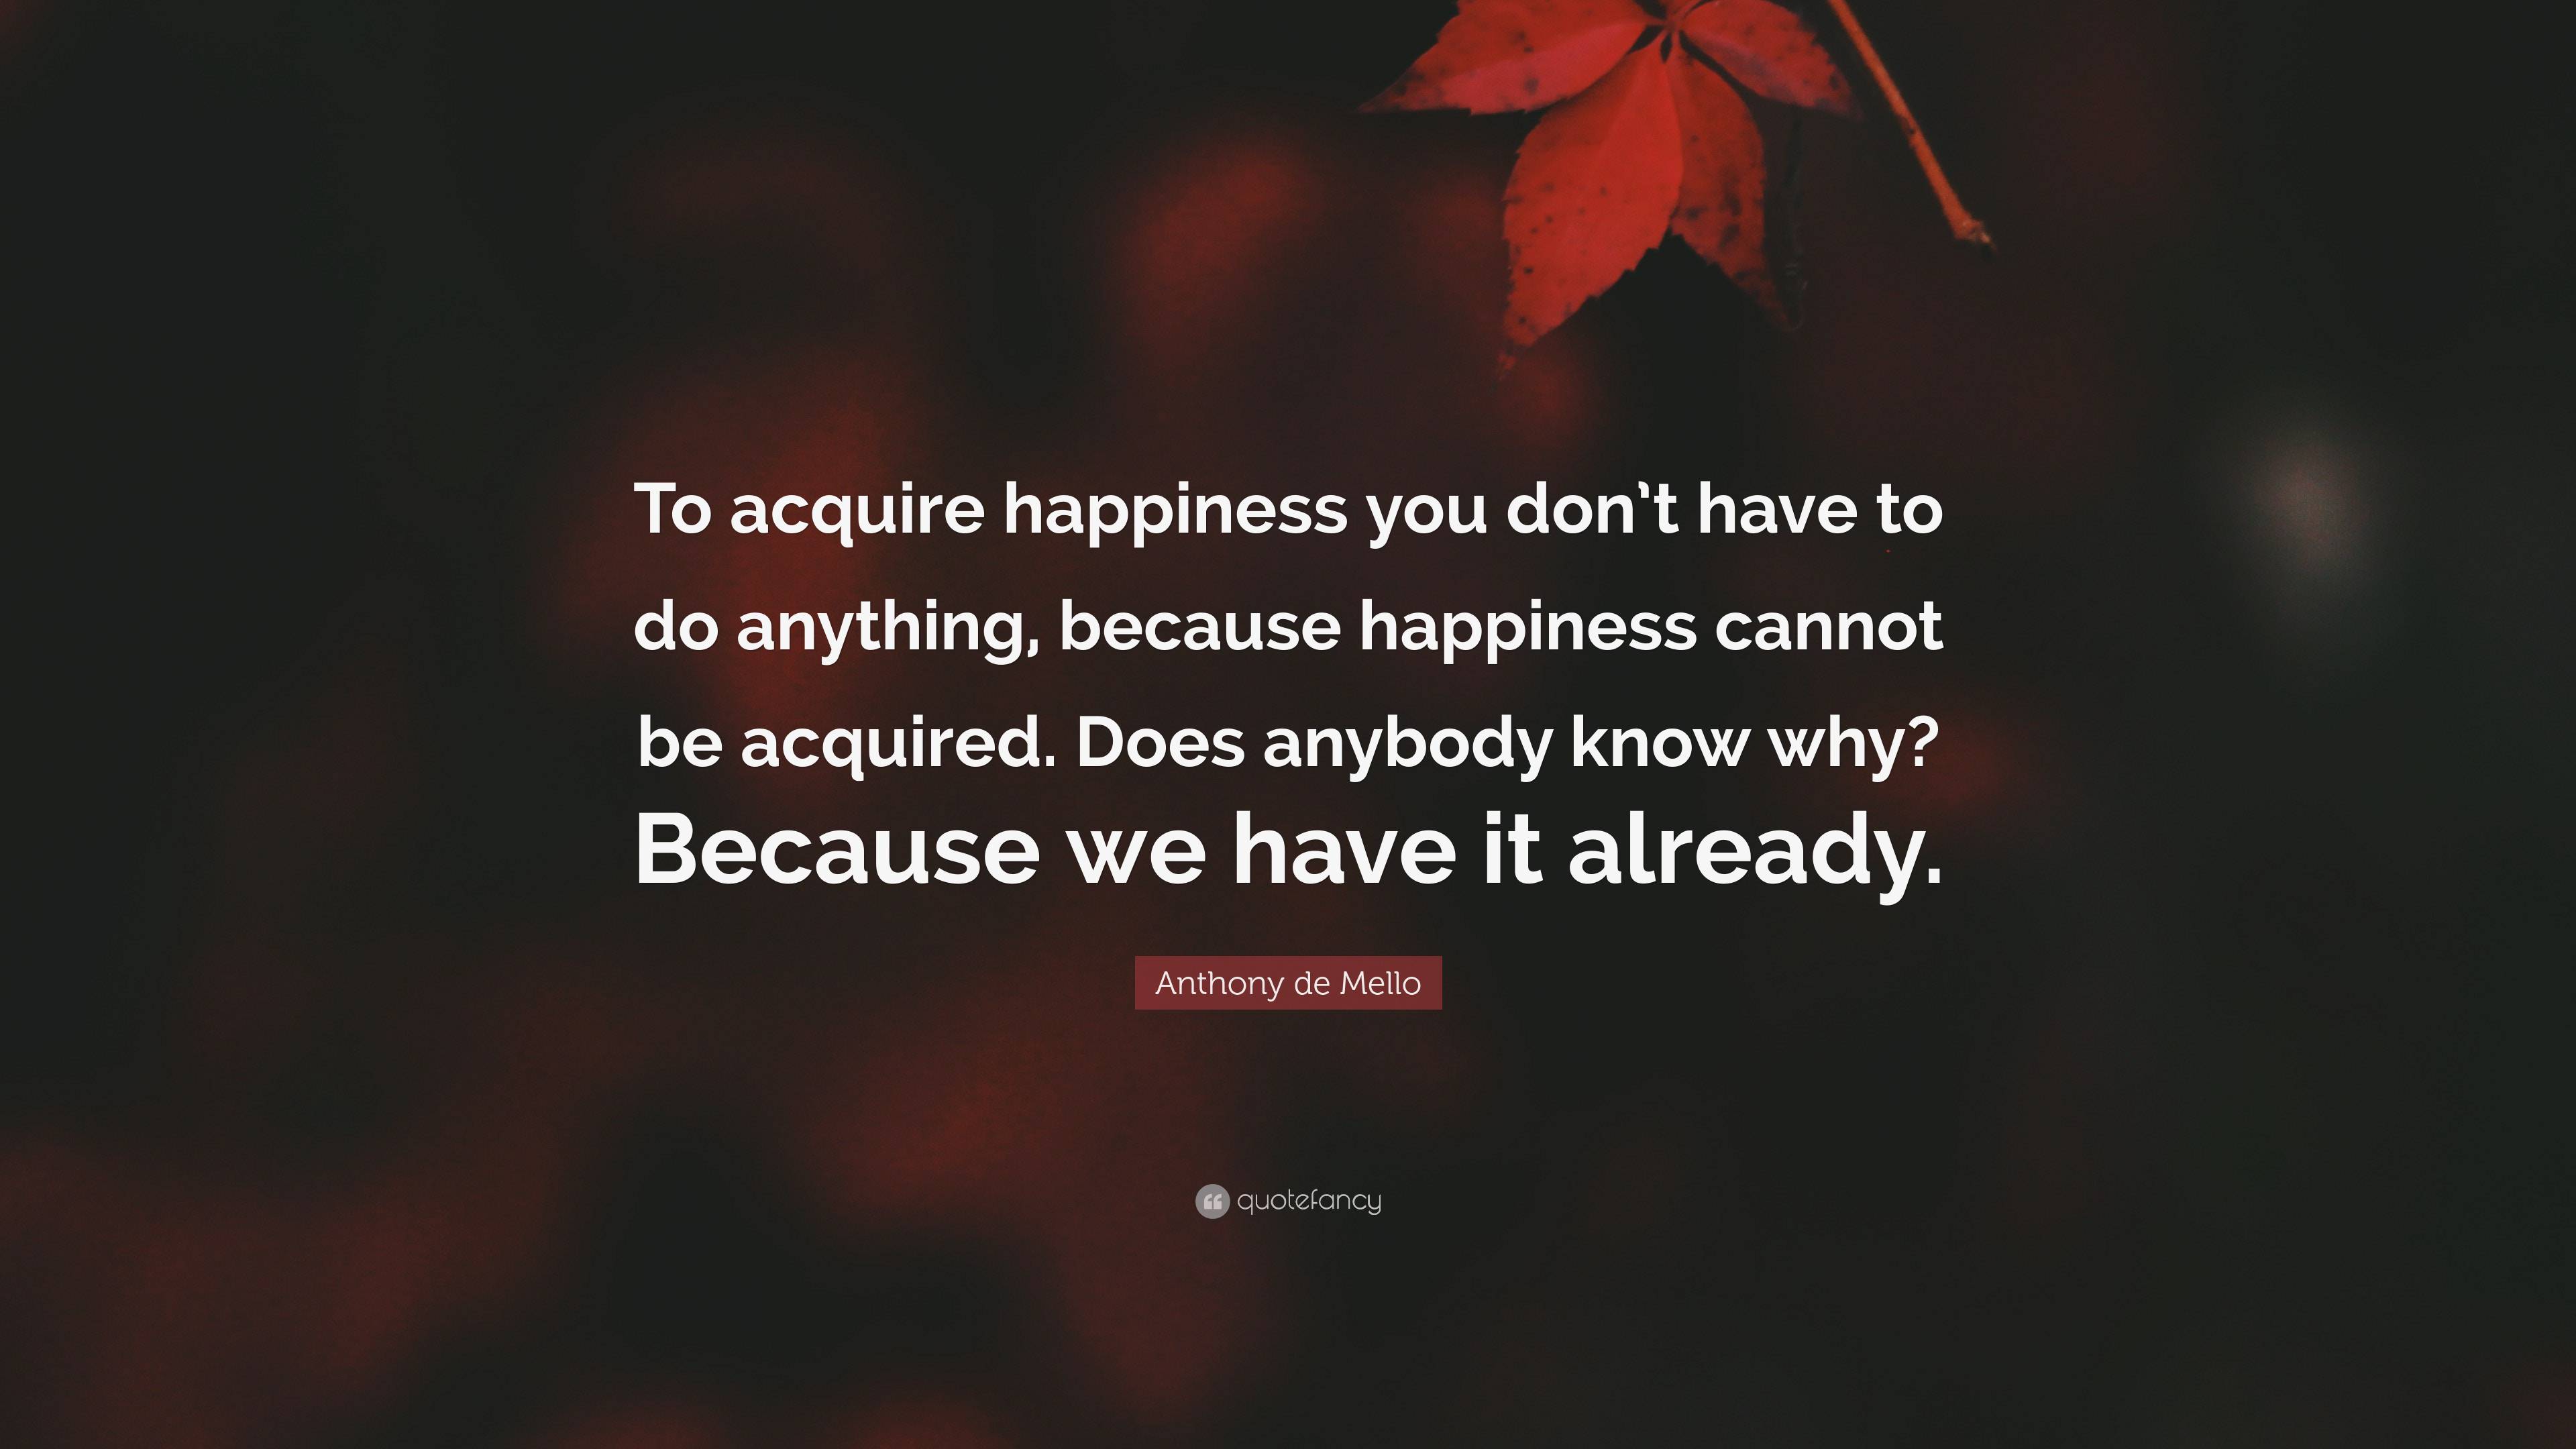 Anthony de Mello Quote: “To acquire happiness you don’t have to do ...